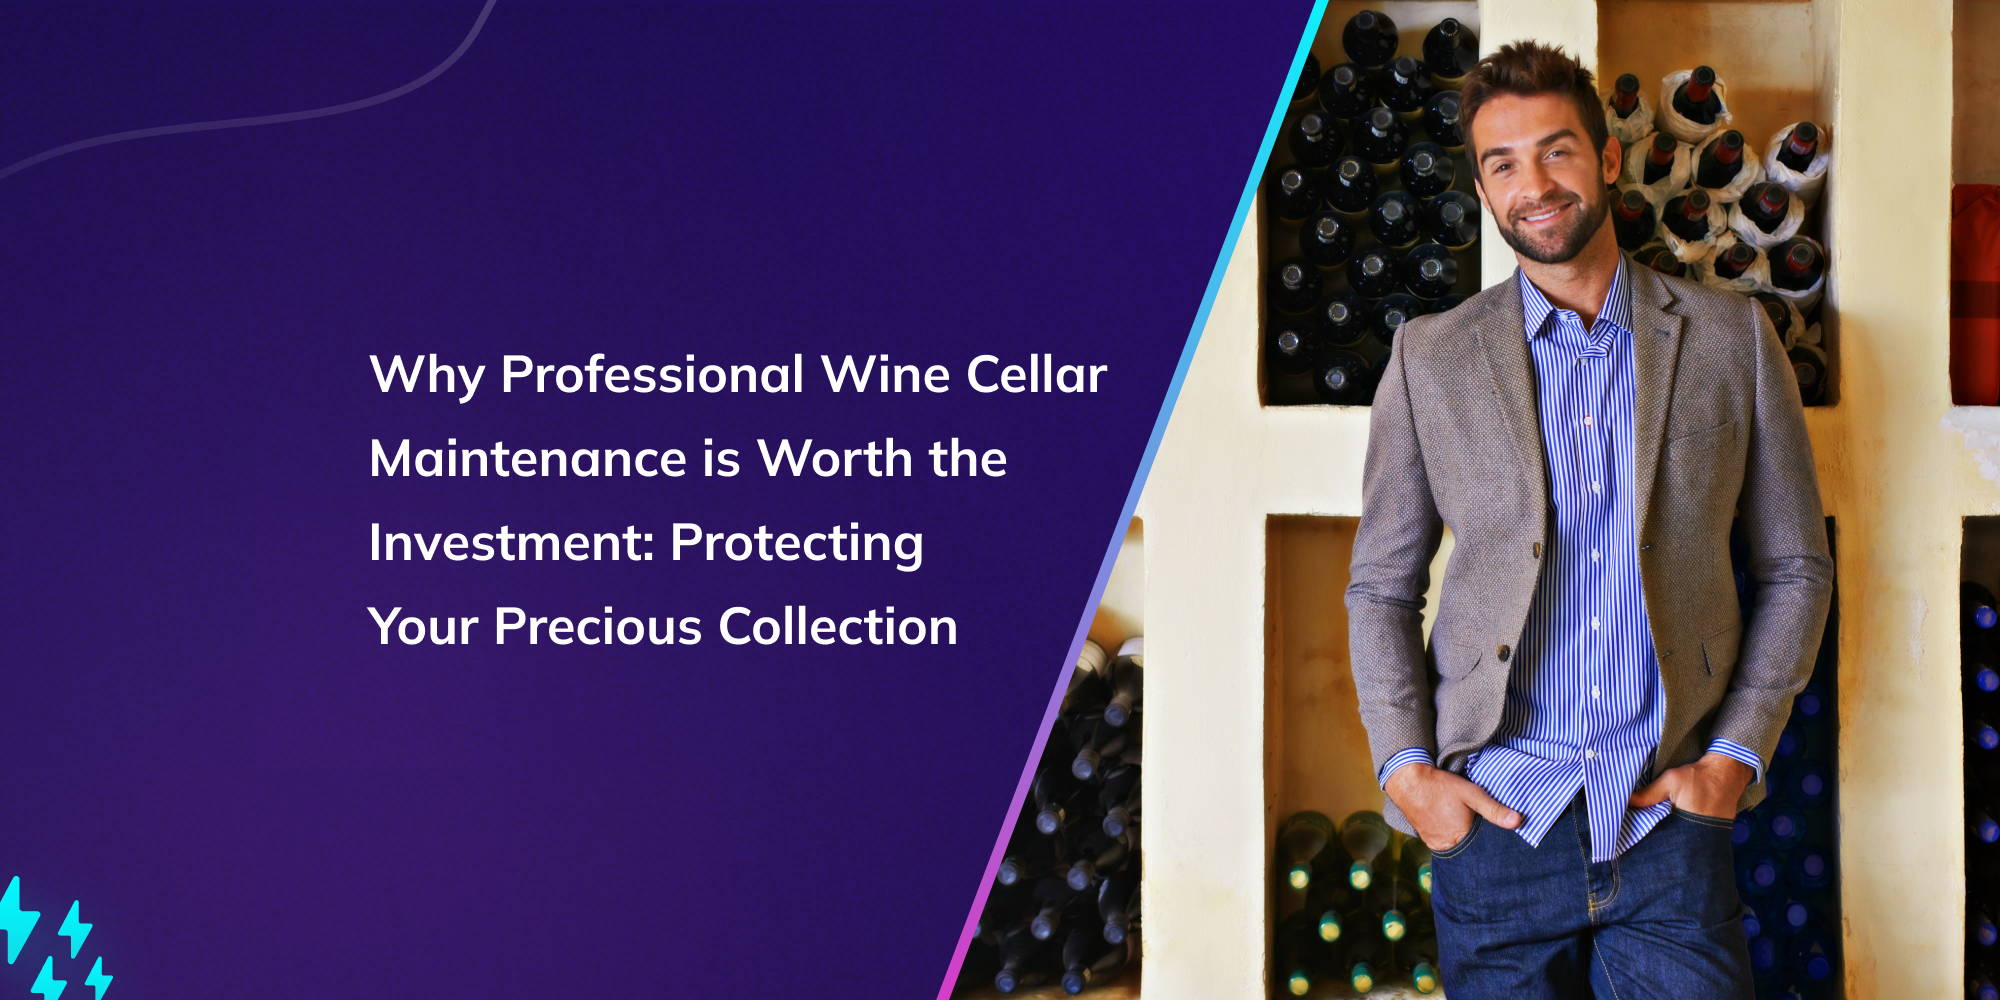 Why Professional Wine Cellar Maintenance is Worth the Investment: Protecting Your Precious Collection